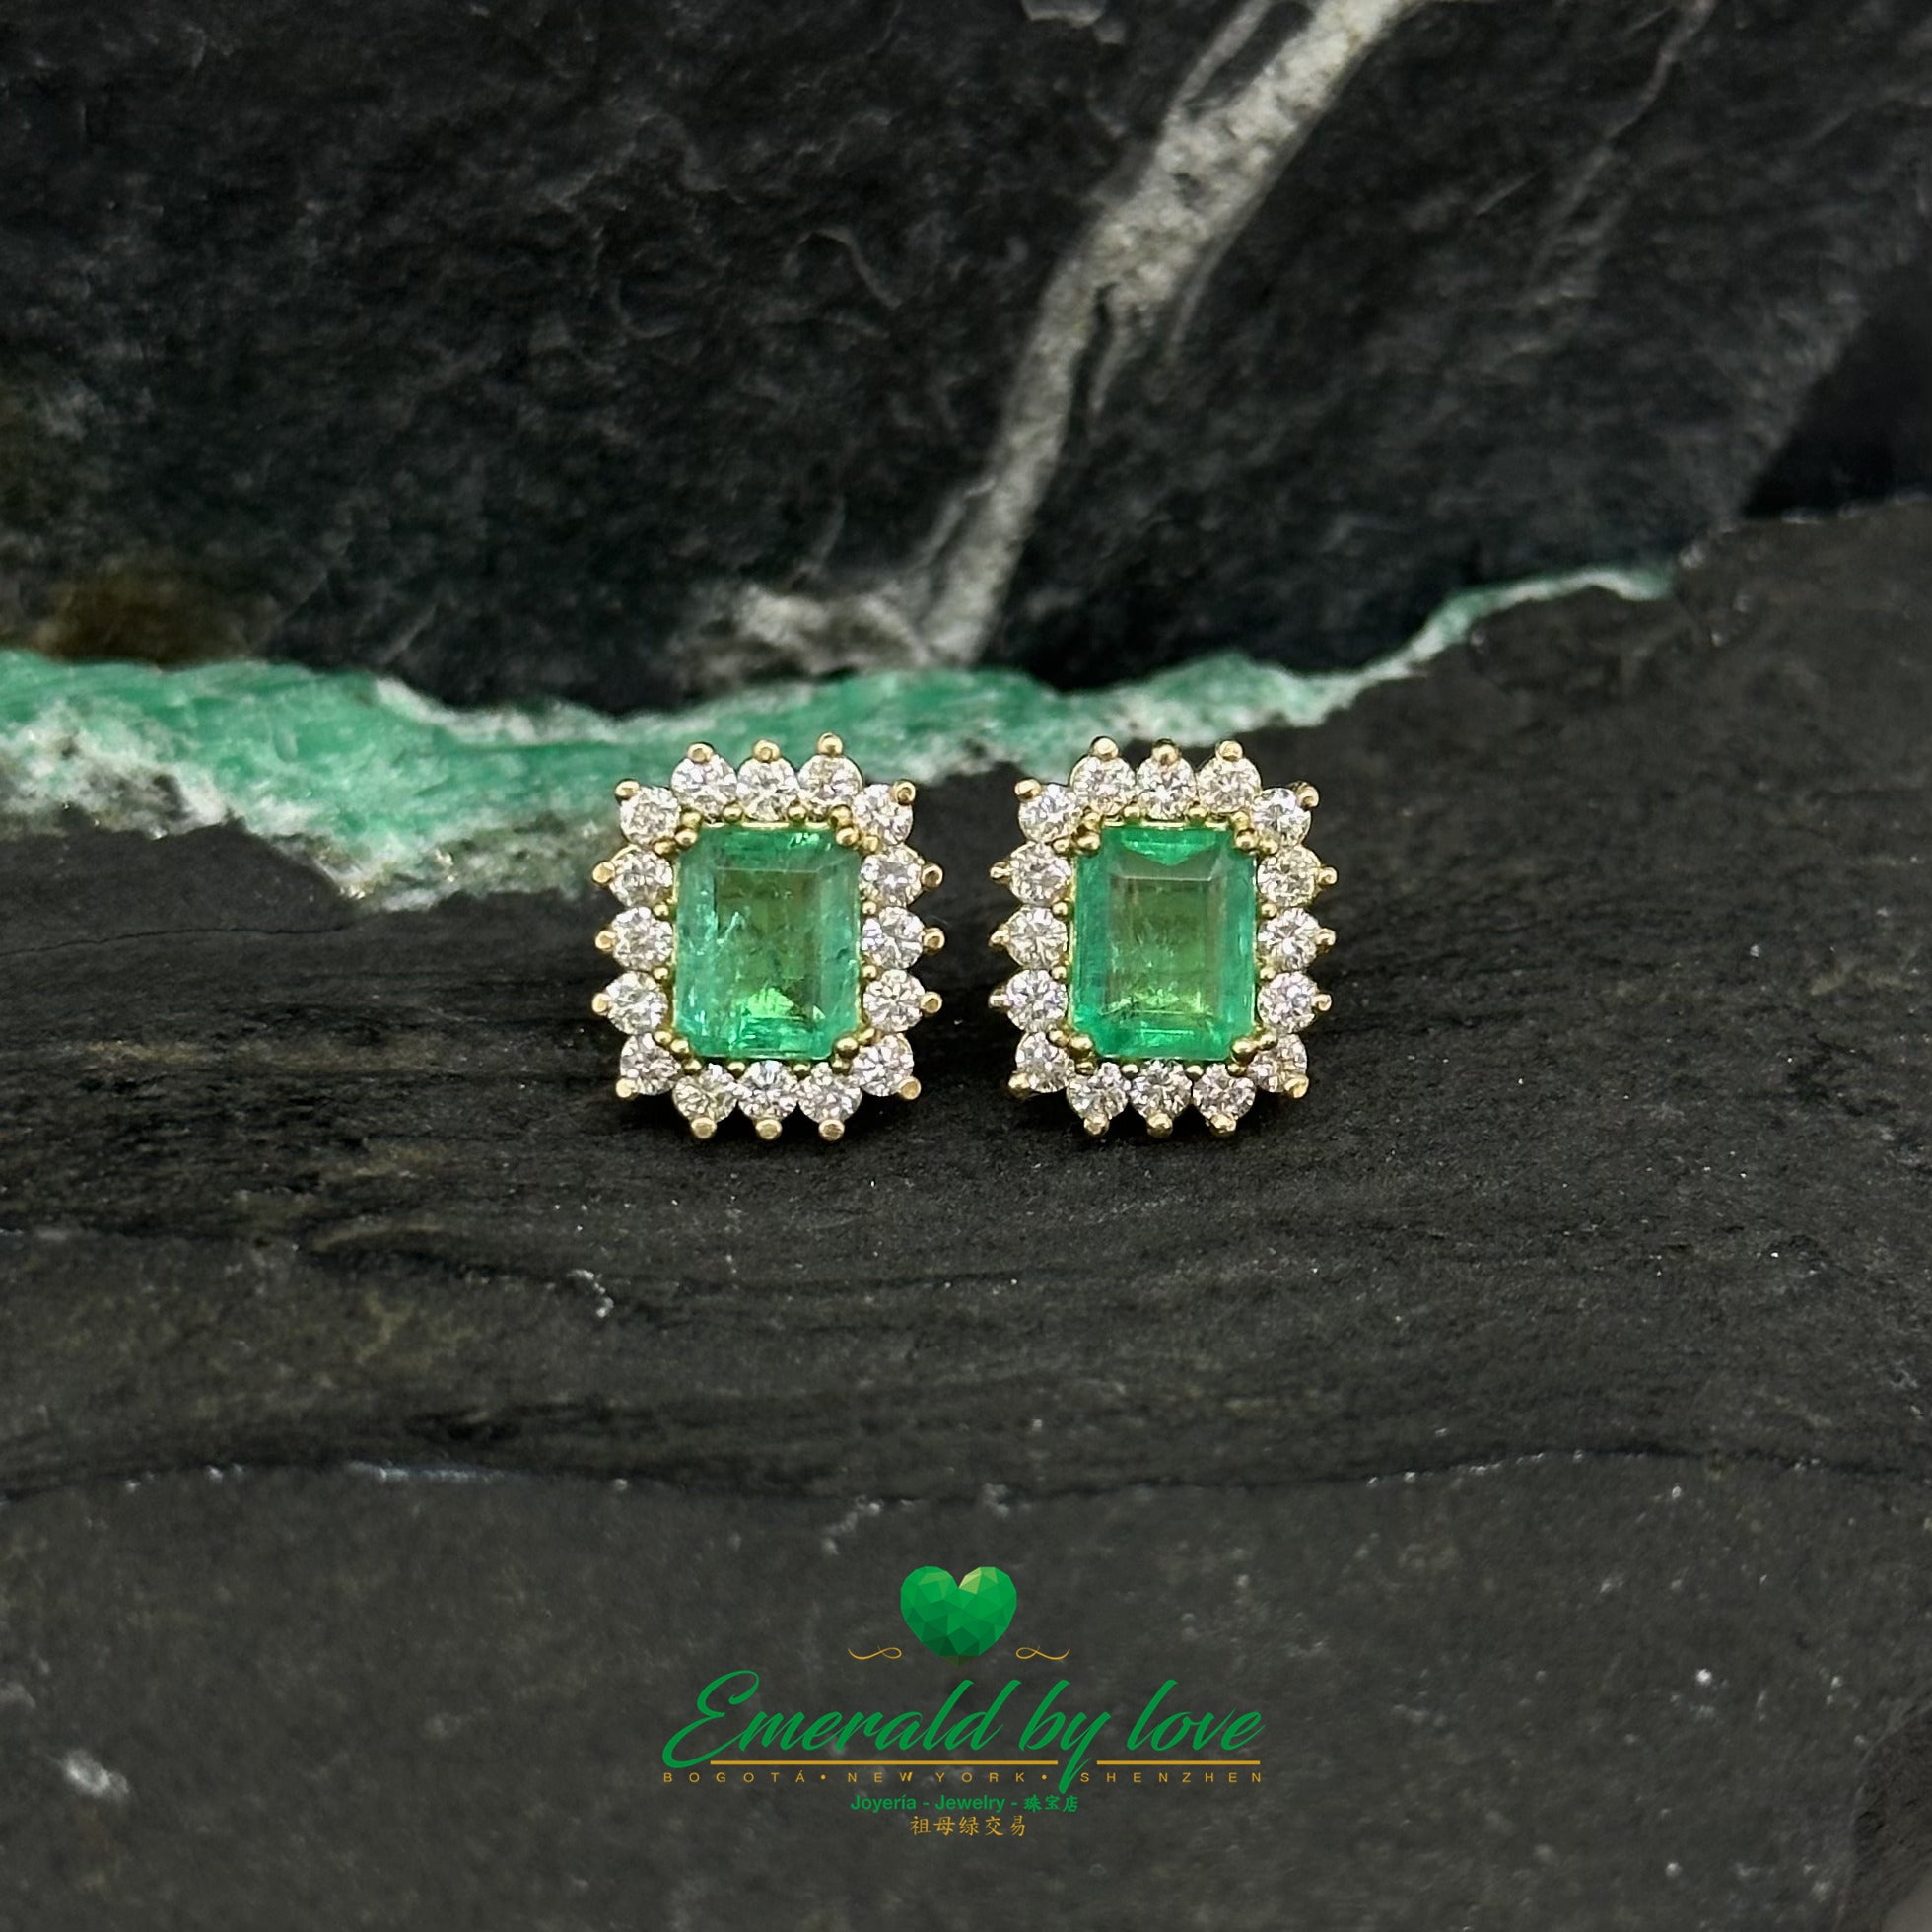 Marquise Cut Colombian Emerald and Diamond Earrings: Exquisite Rectangular Crystals